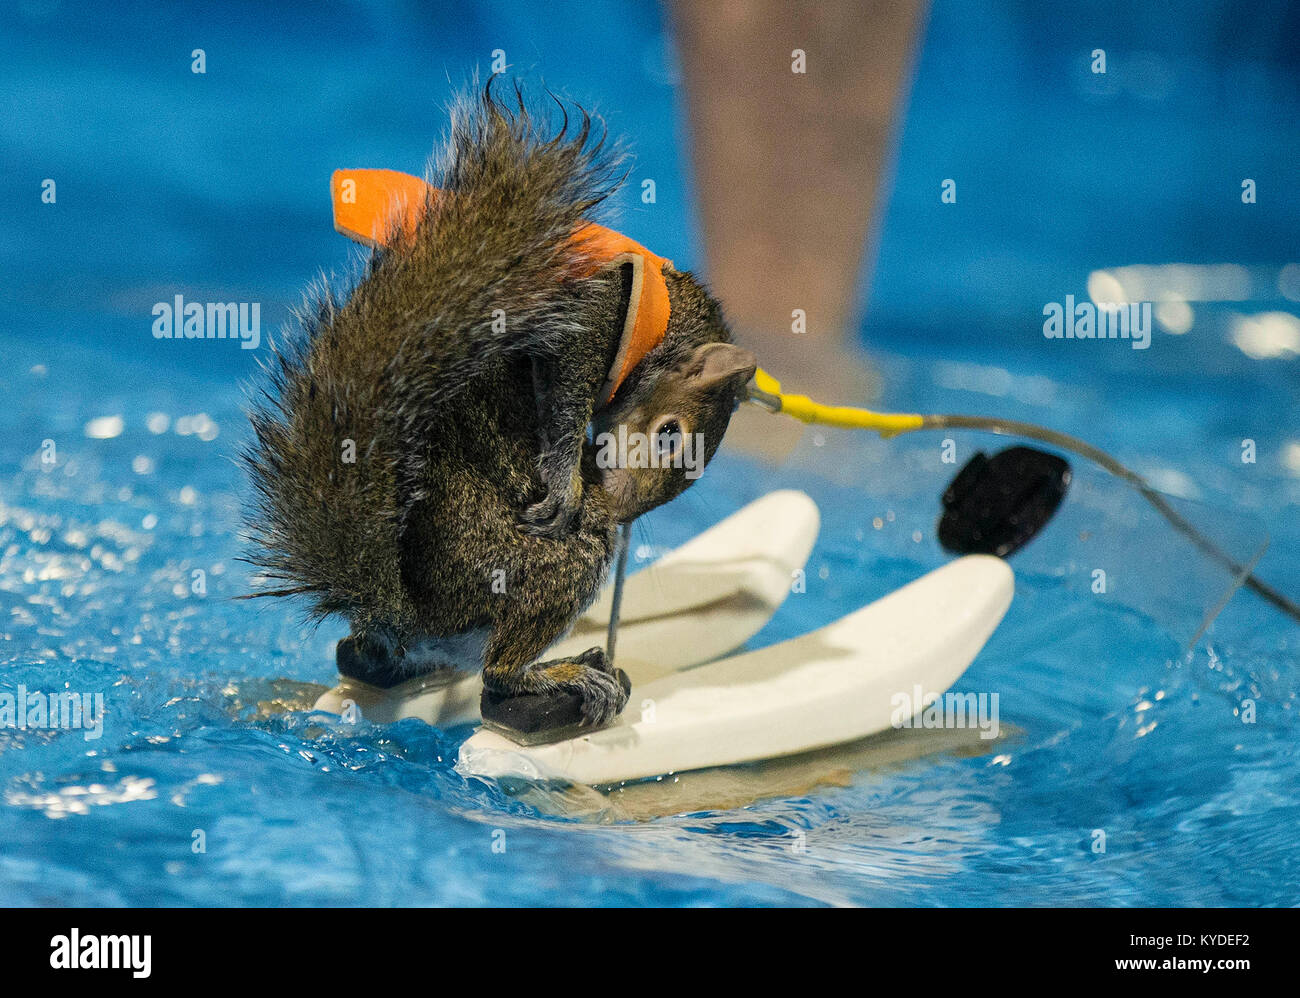 Toronto, Canada. 14th Jan, 2018. Twiggy, the 10 years old Water-Skiing Squirrel, performs during the 2018 Toronto International Boat Show at Exhibition Place in Toronto, Canada, Jan. 14, 2018. Credit: Zou Zheng/Xinhua/Alamy Live News Stock Photo